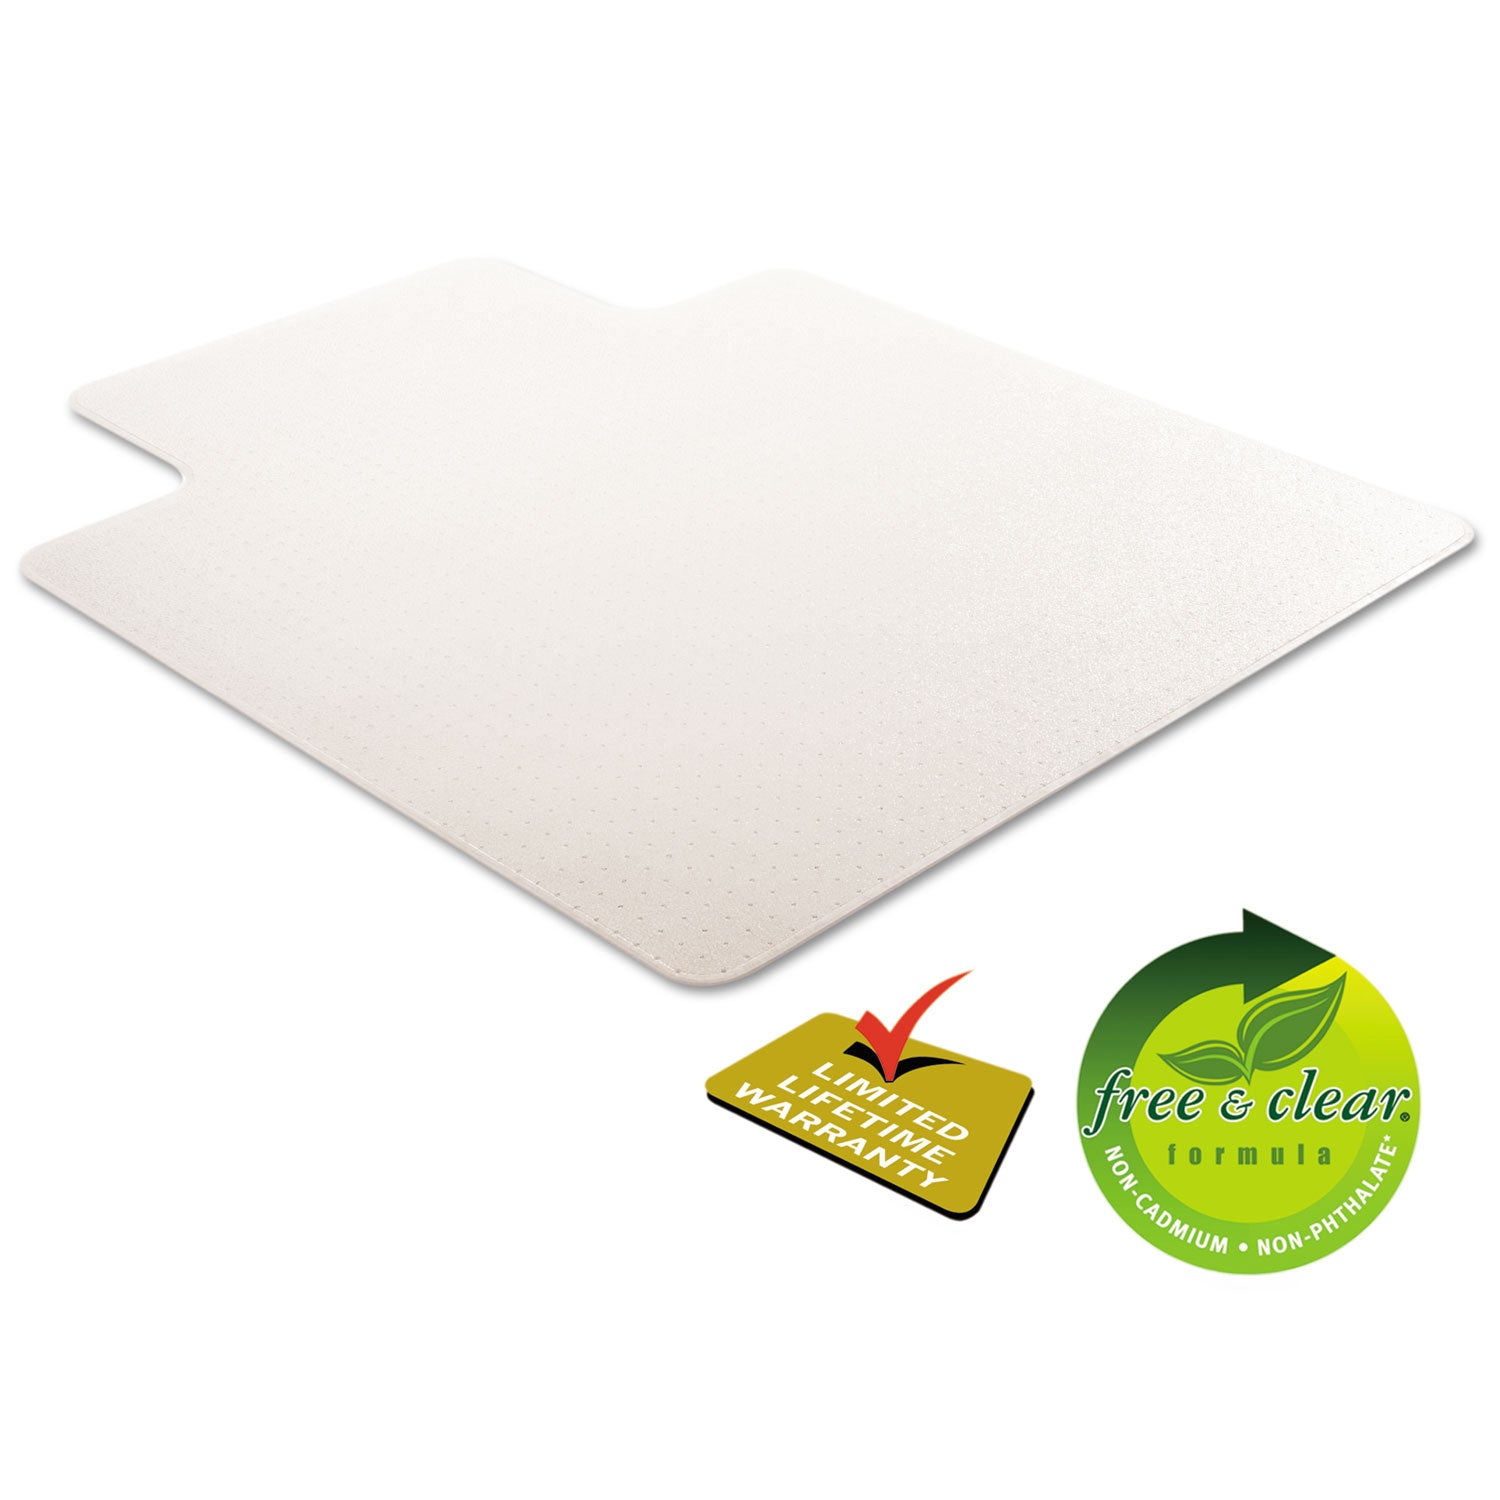 RollaMat Frequent Use Chair Mat, Med Pile Carpet, Flat, 45 x 53, Wide Lipped, Clear - 